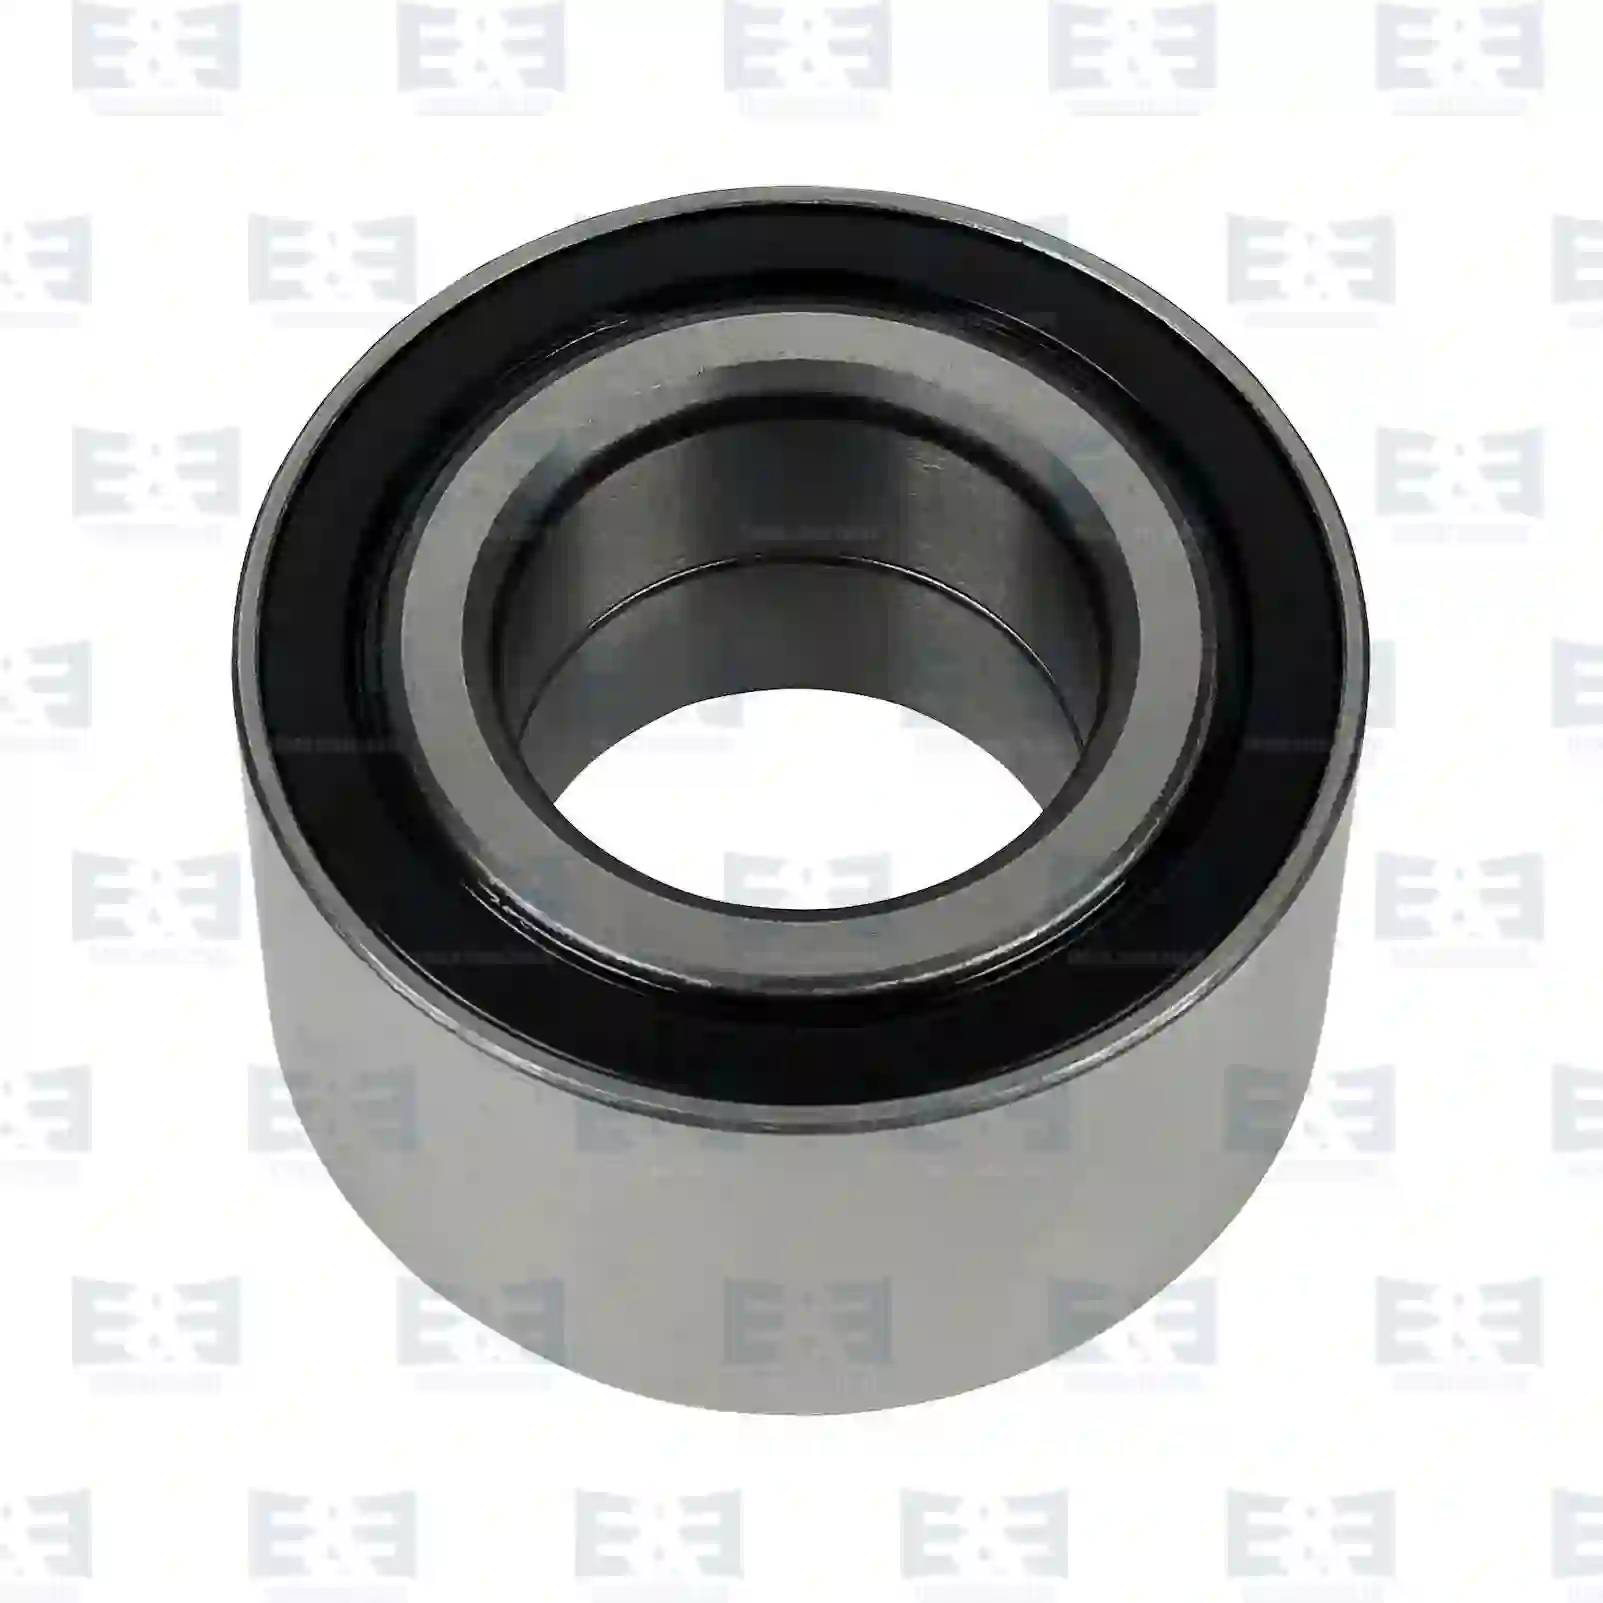 Camshaft Ball bearing, EE No 2E2206235 ,  oem no:1313361, 1525077, 1774645, 1774646, 1905699, ZG40186-0008 E&E Truck Spare Parts | Truck Spare Parts, Auotomotive Spare Parts